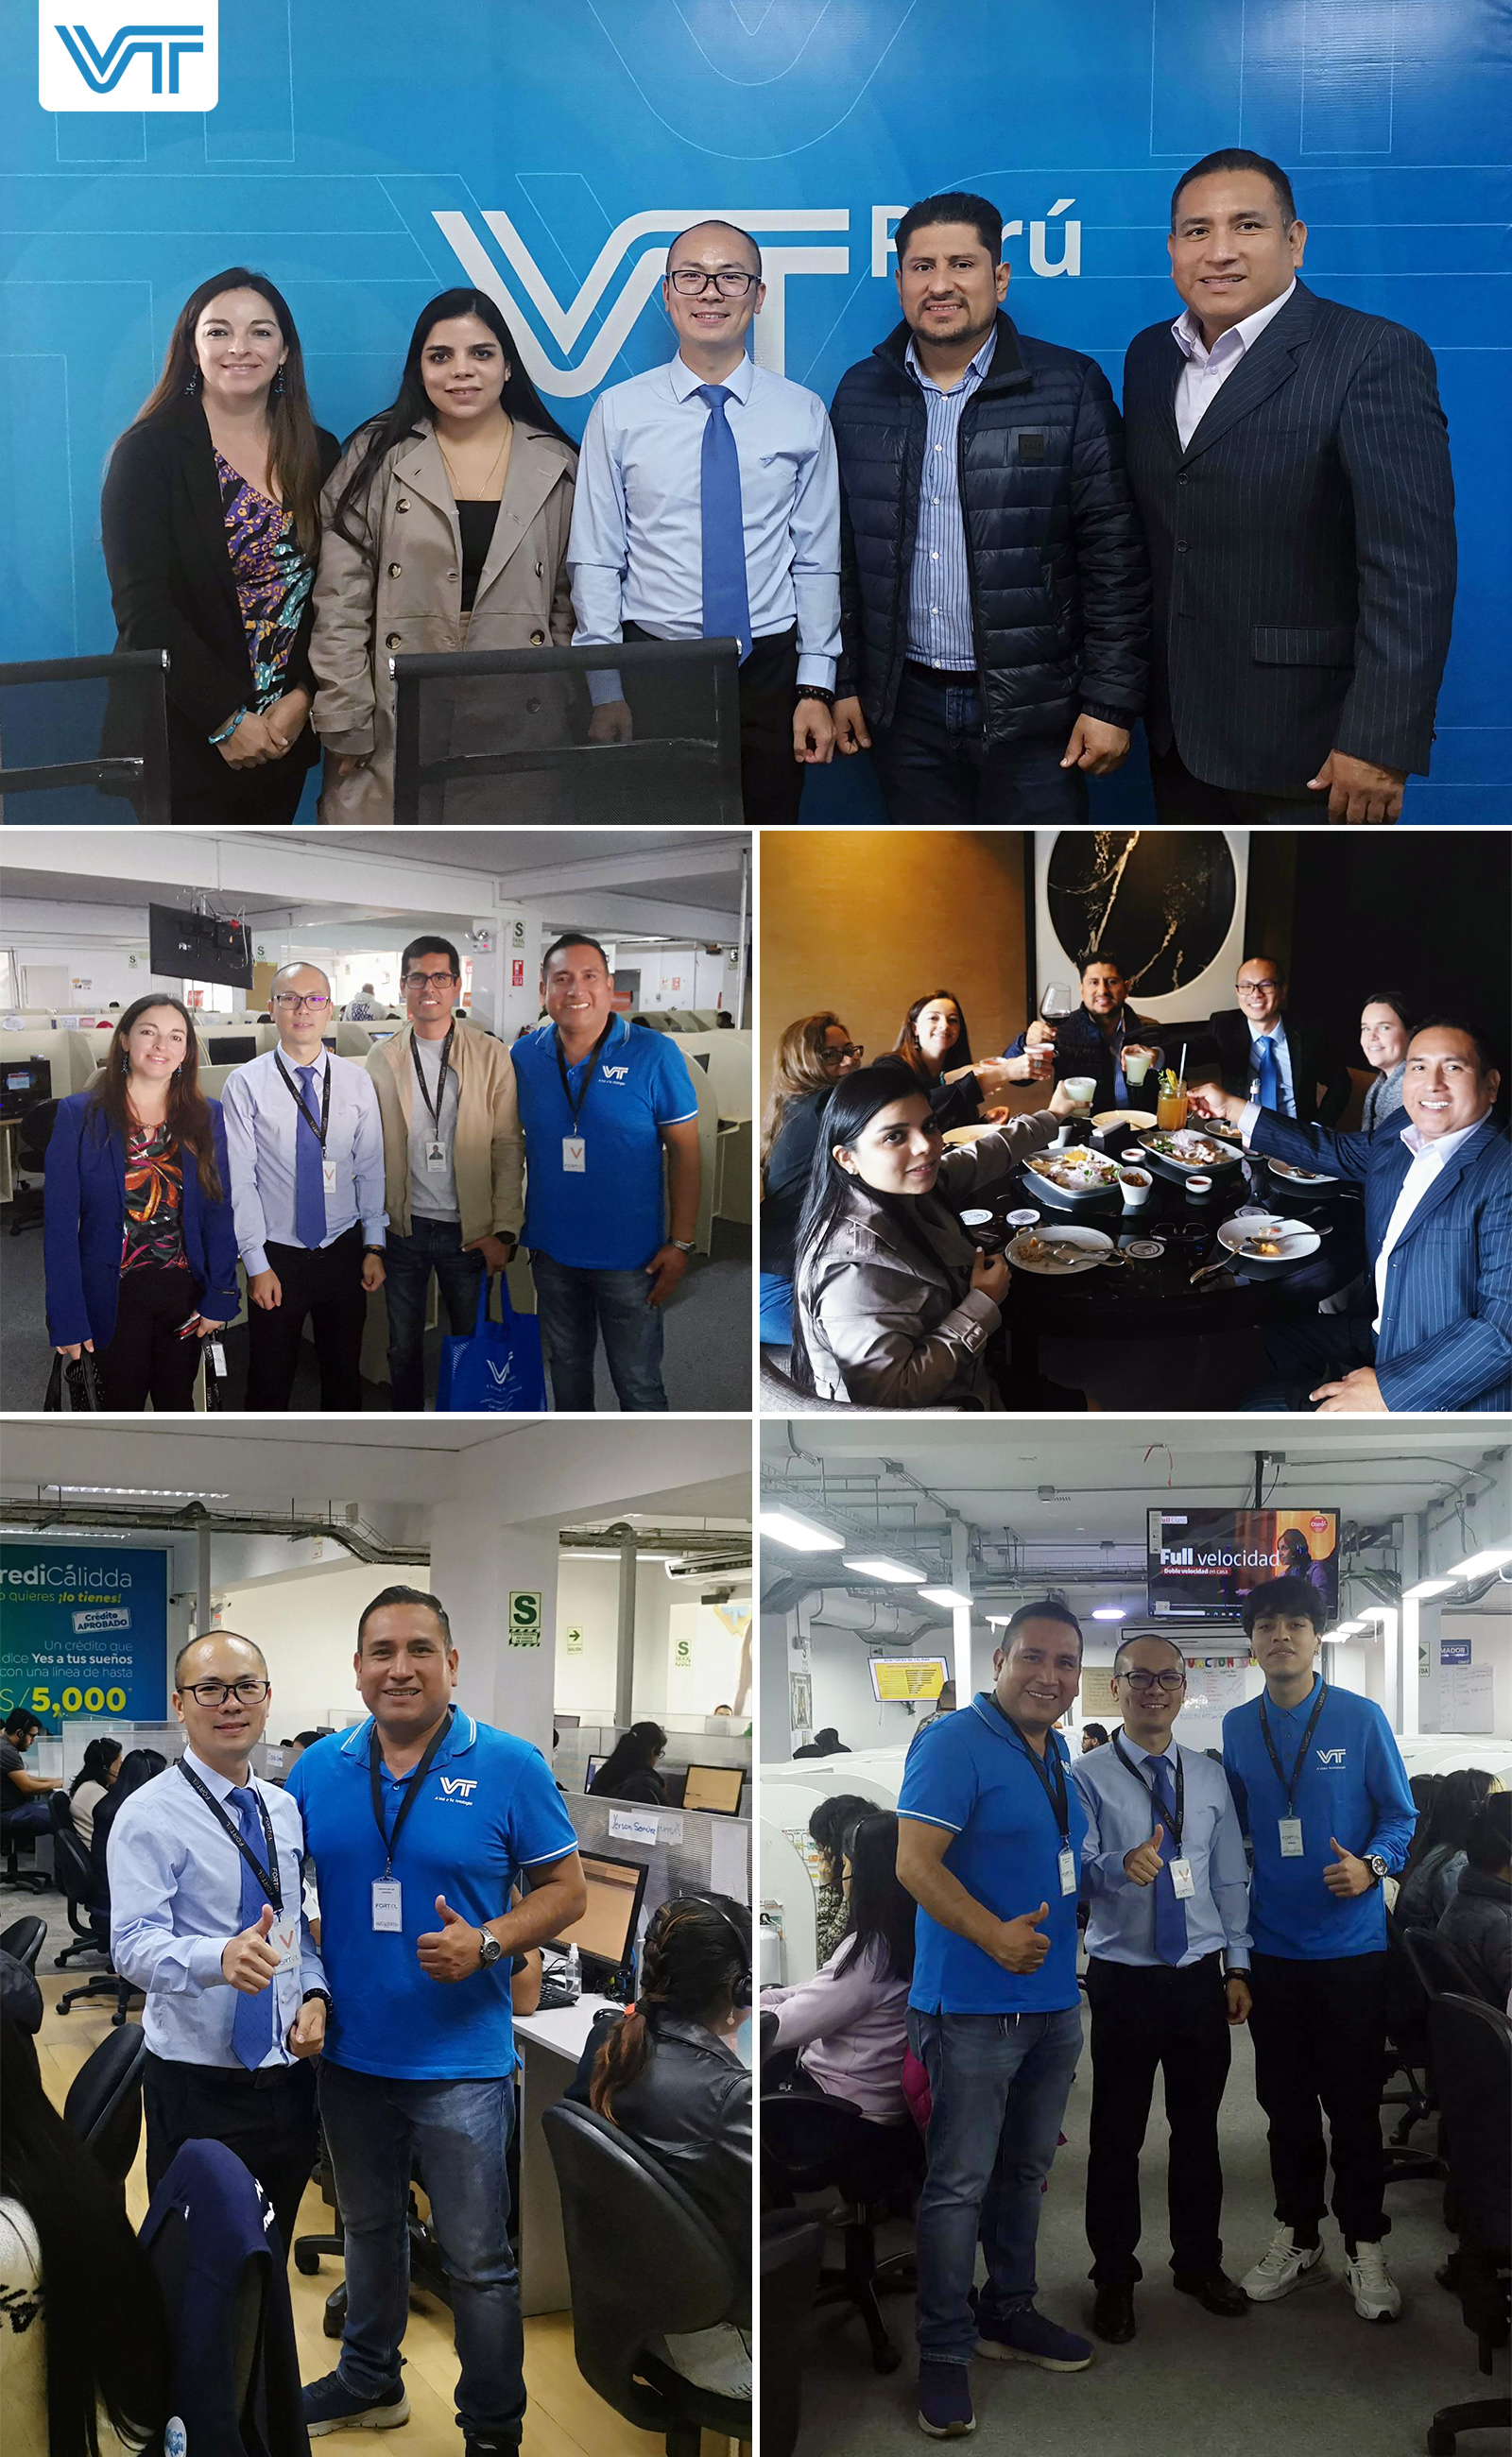 VT Visited Latin America Partners with Friendly Relationships to Enhance Better Cooperation and Development